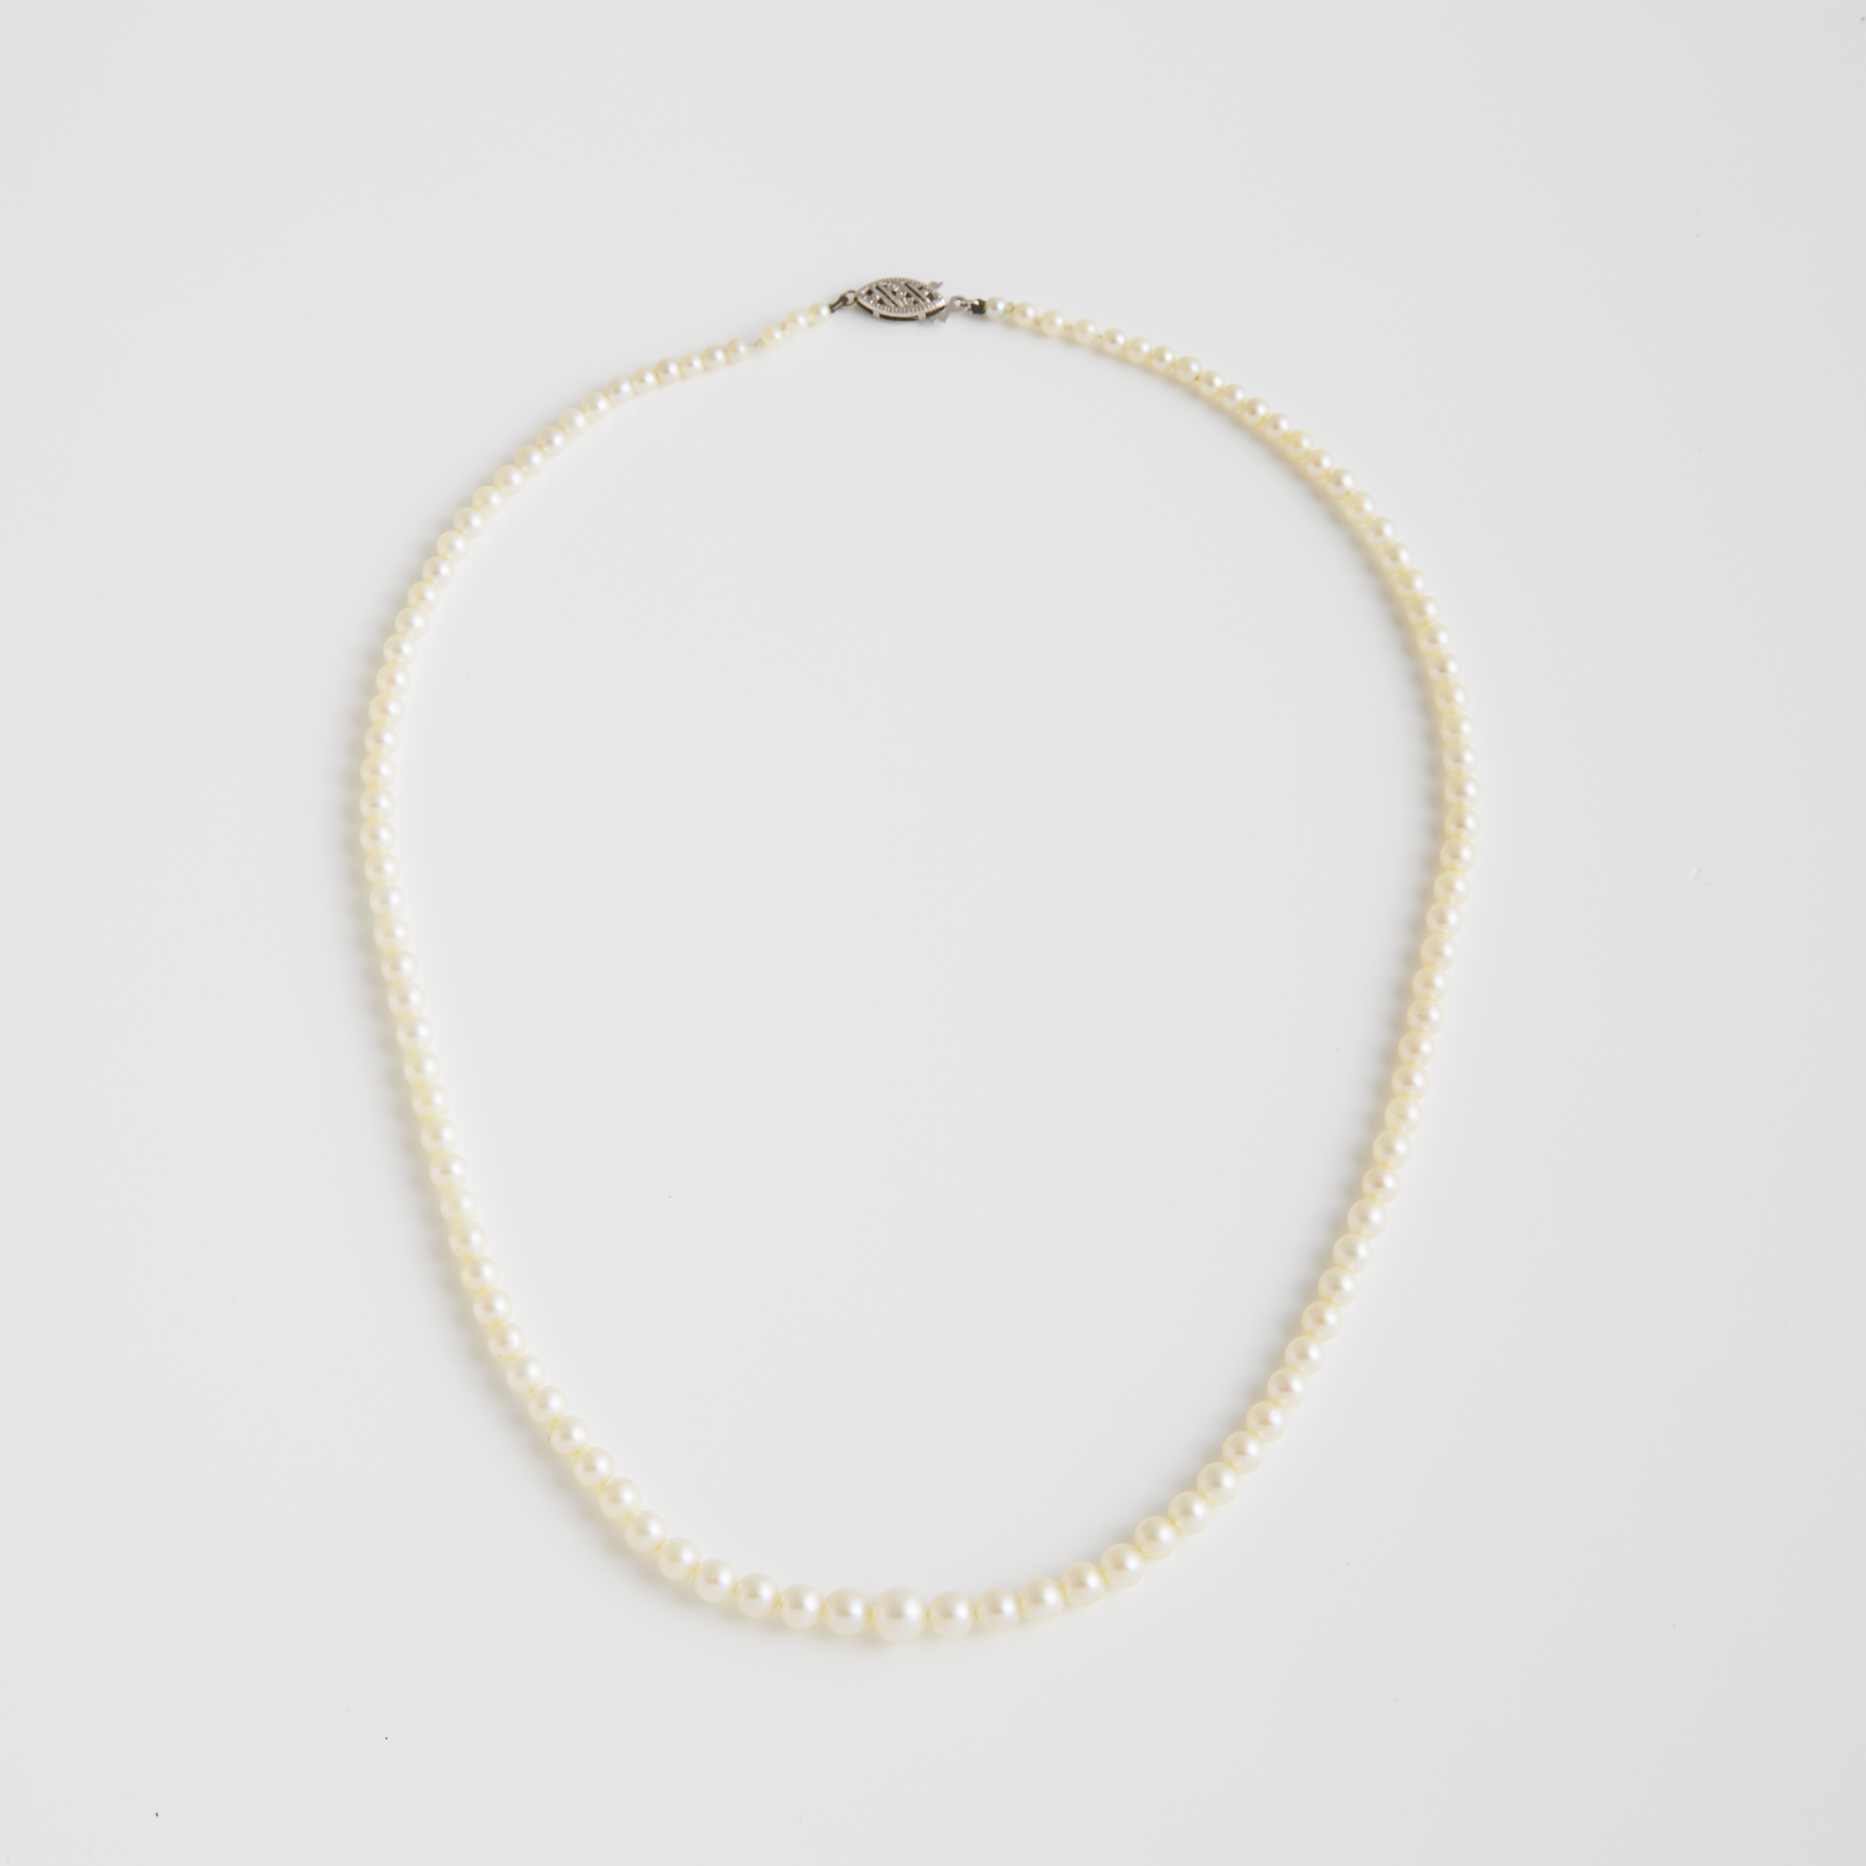 Single Graduated Strand Of Small Cultured Pearls